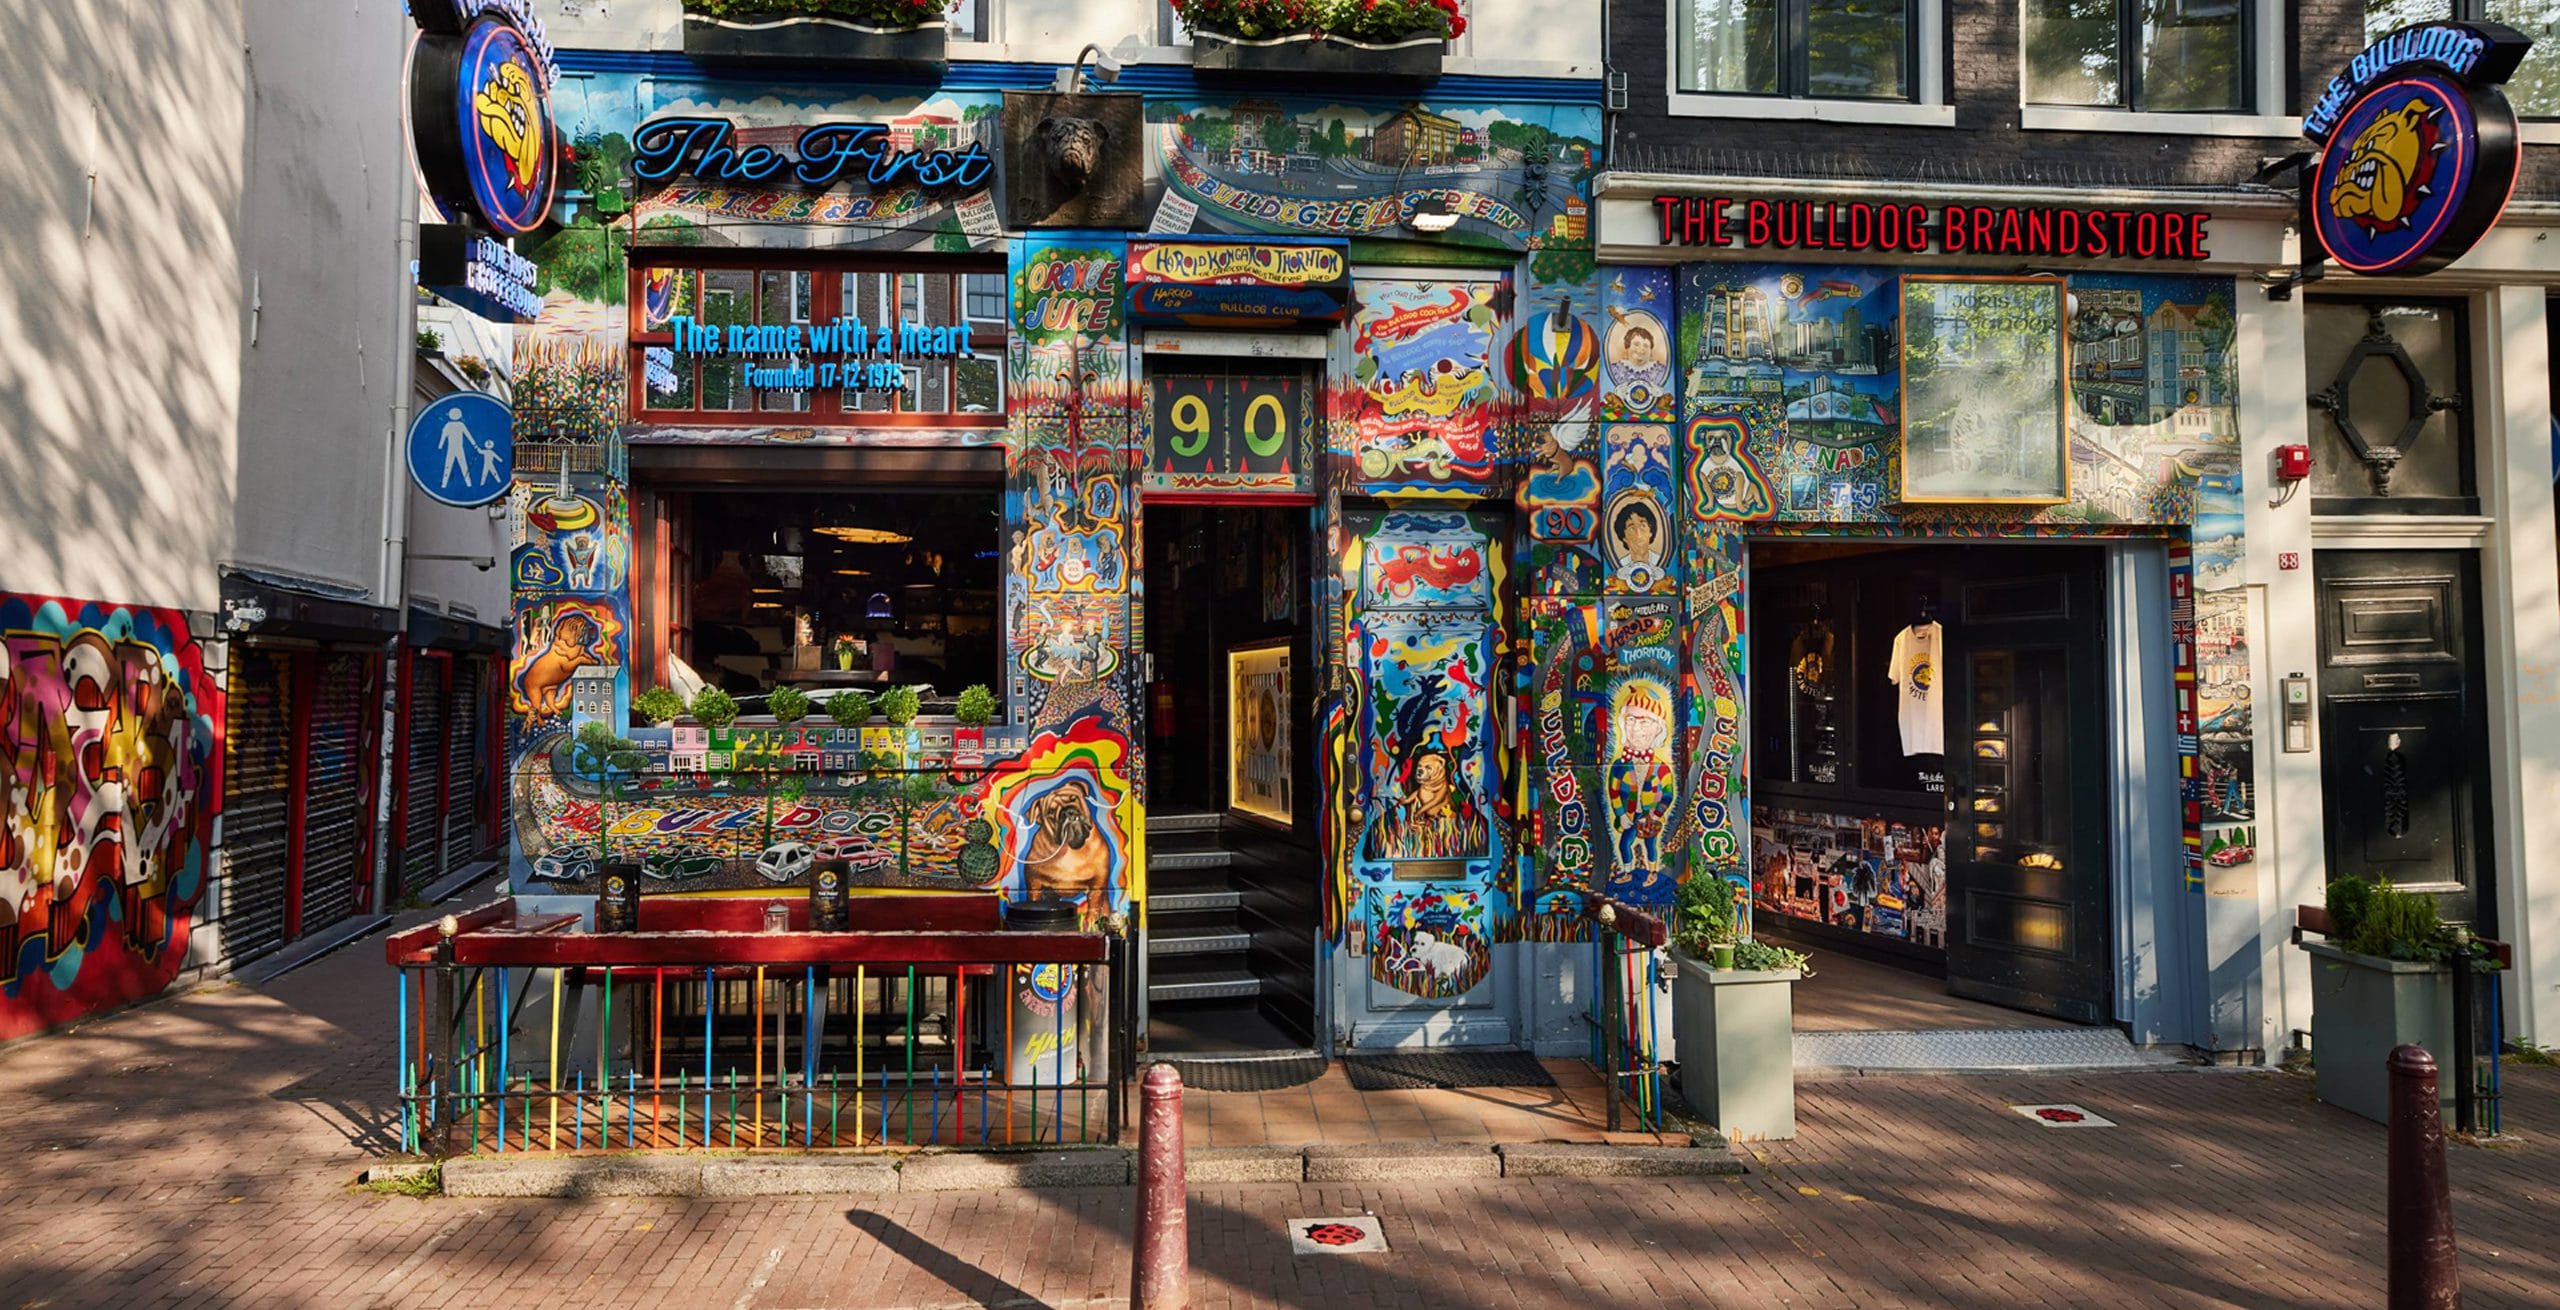 I Becoming Dutch - This is The Bulldog Palace. It is part of the The  Bulldog The First which is one of the oldest coffeeshops in the city of  Amsterdam. The Bulldog